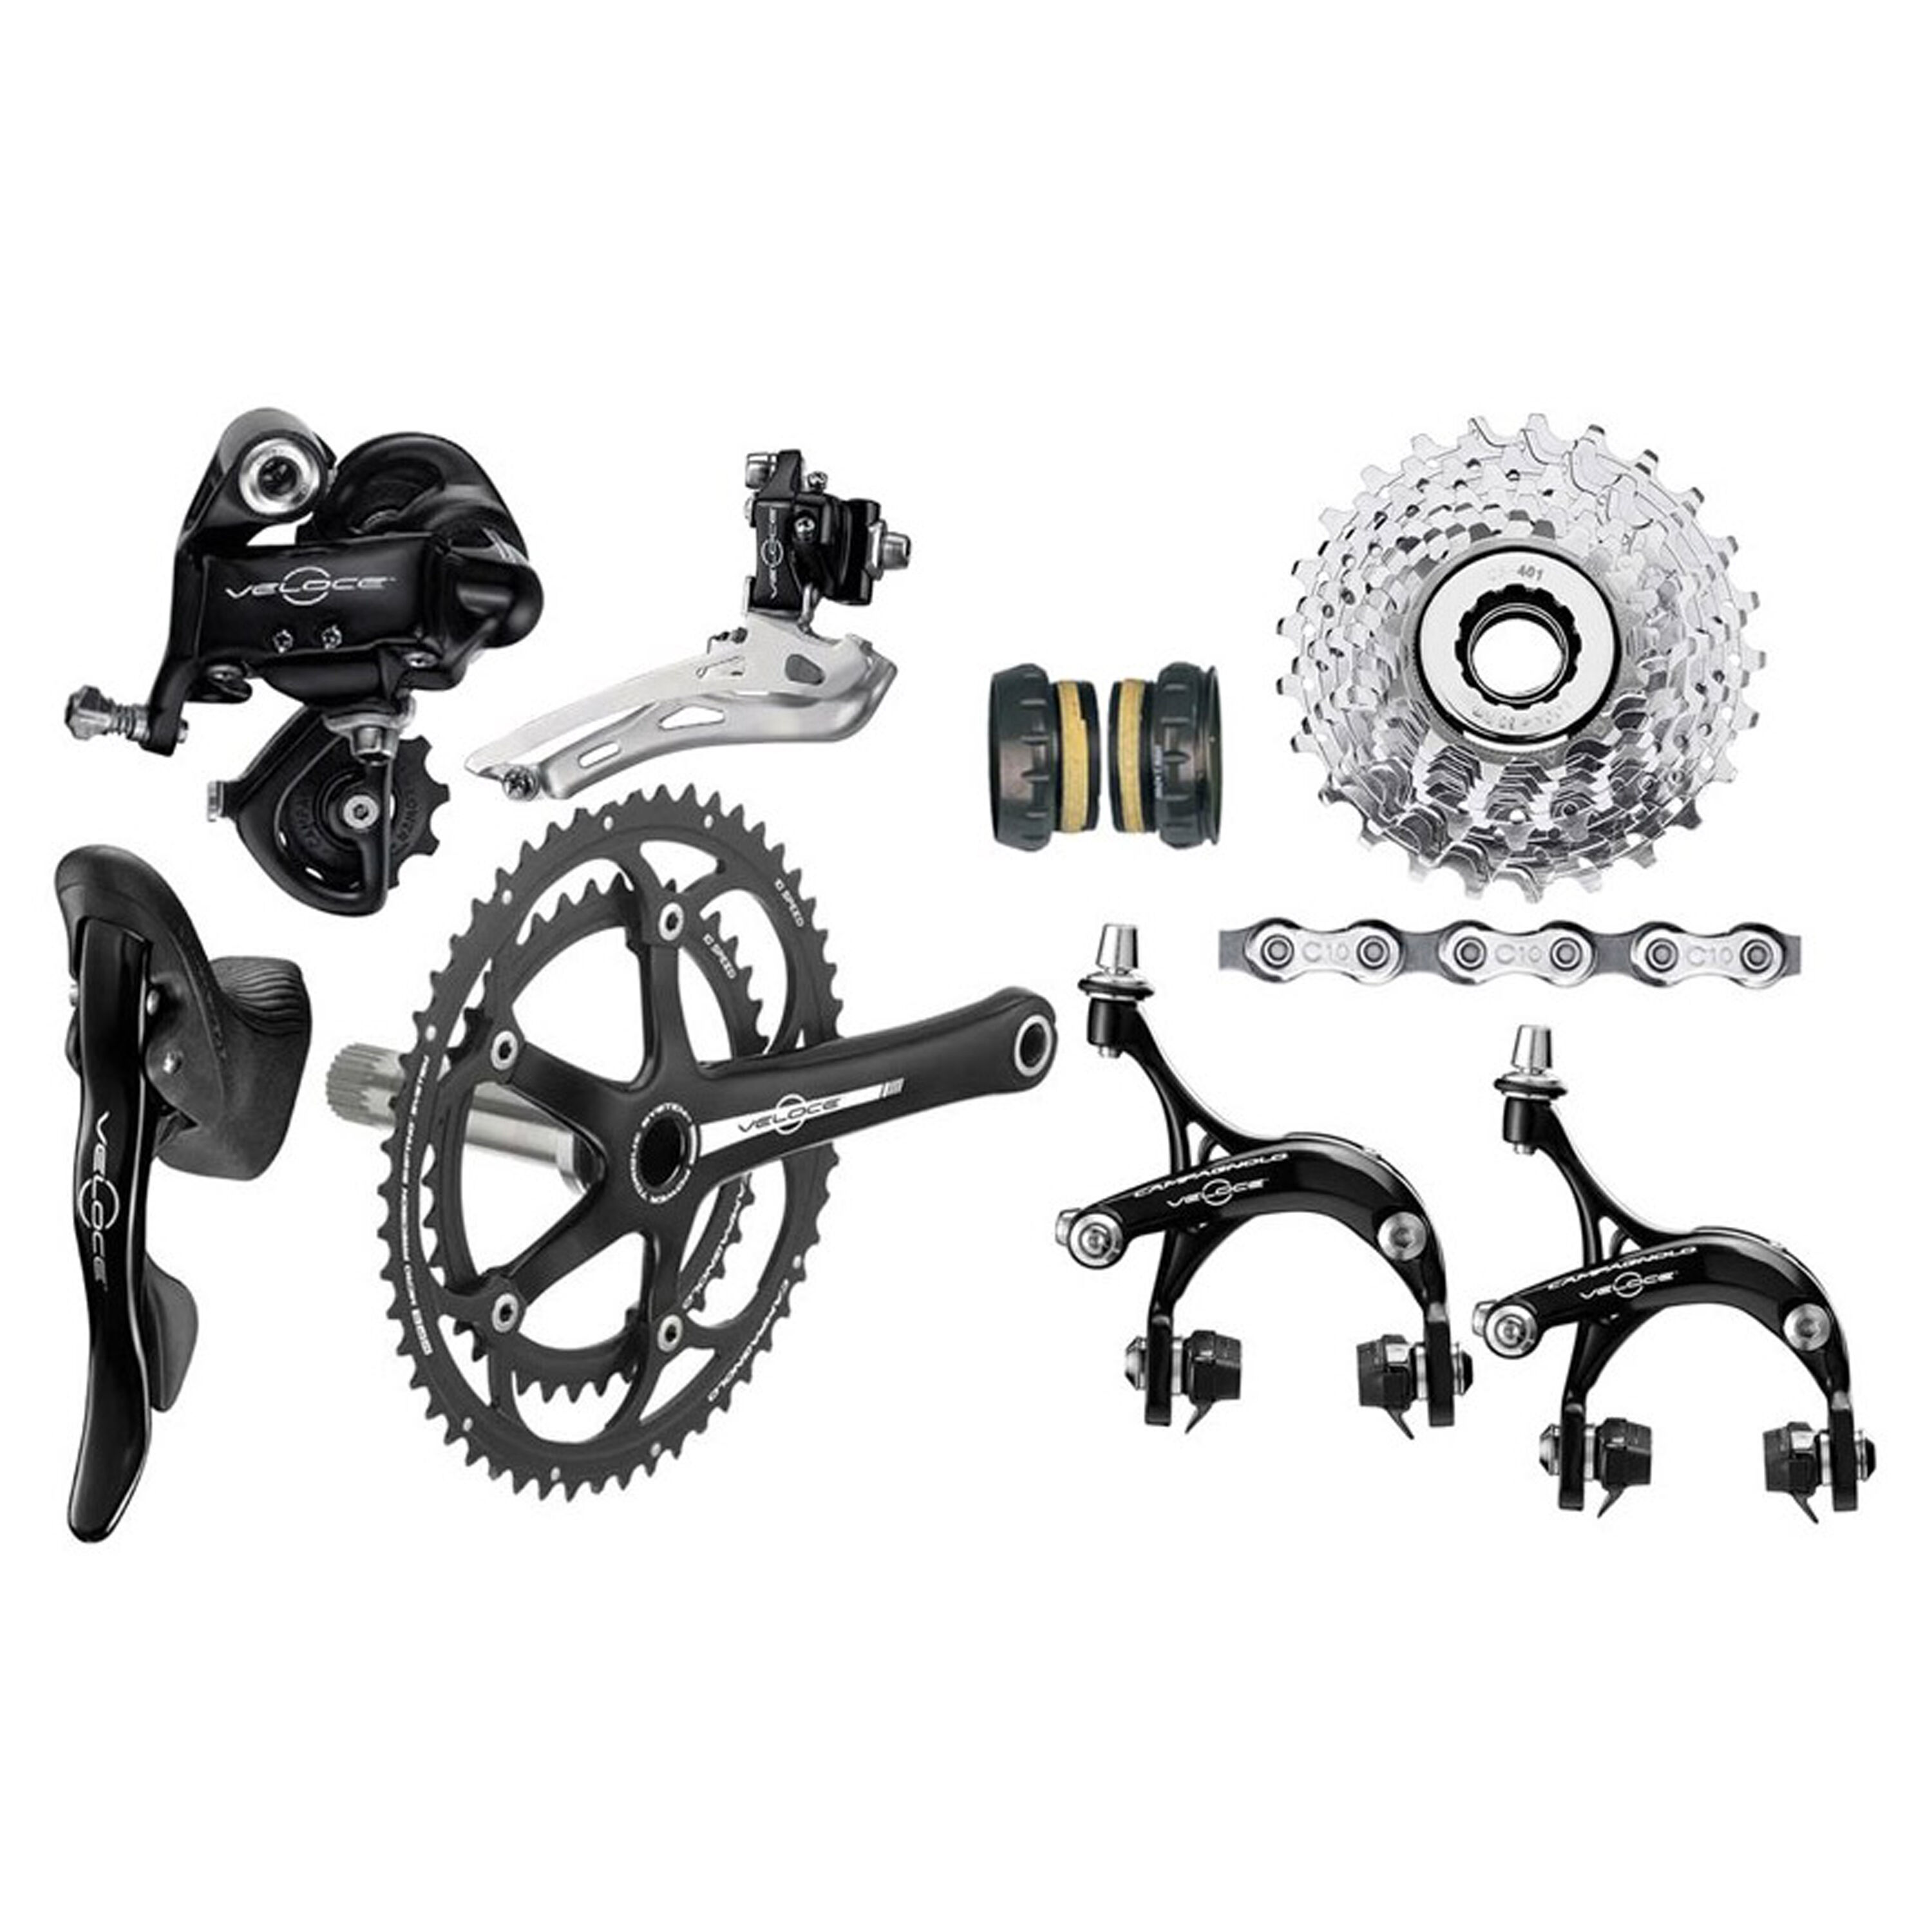 Campagnolo Veloce 10S 50-34 groupset LordGun online bike store